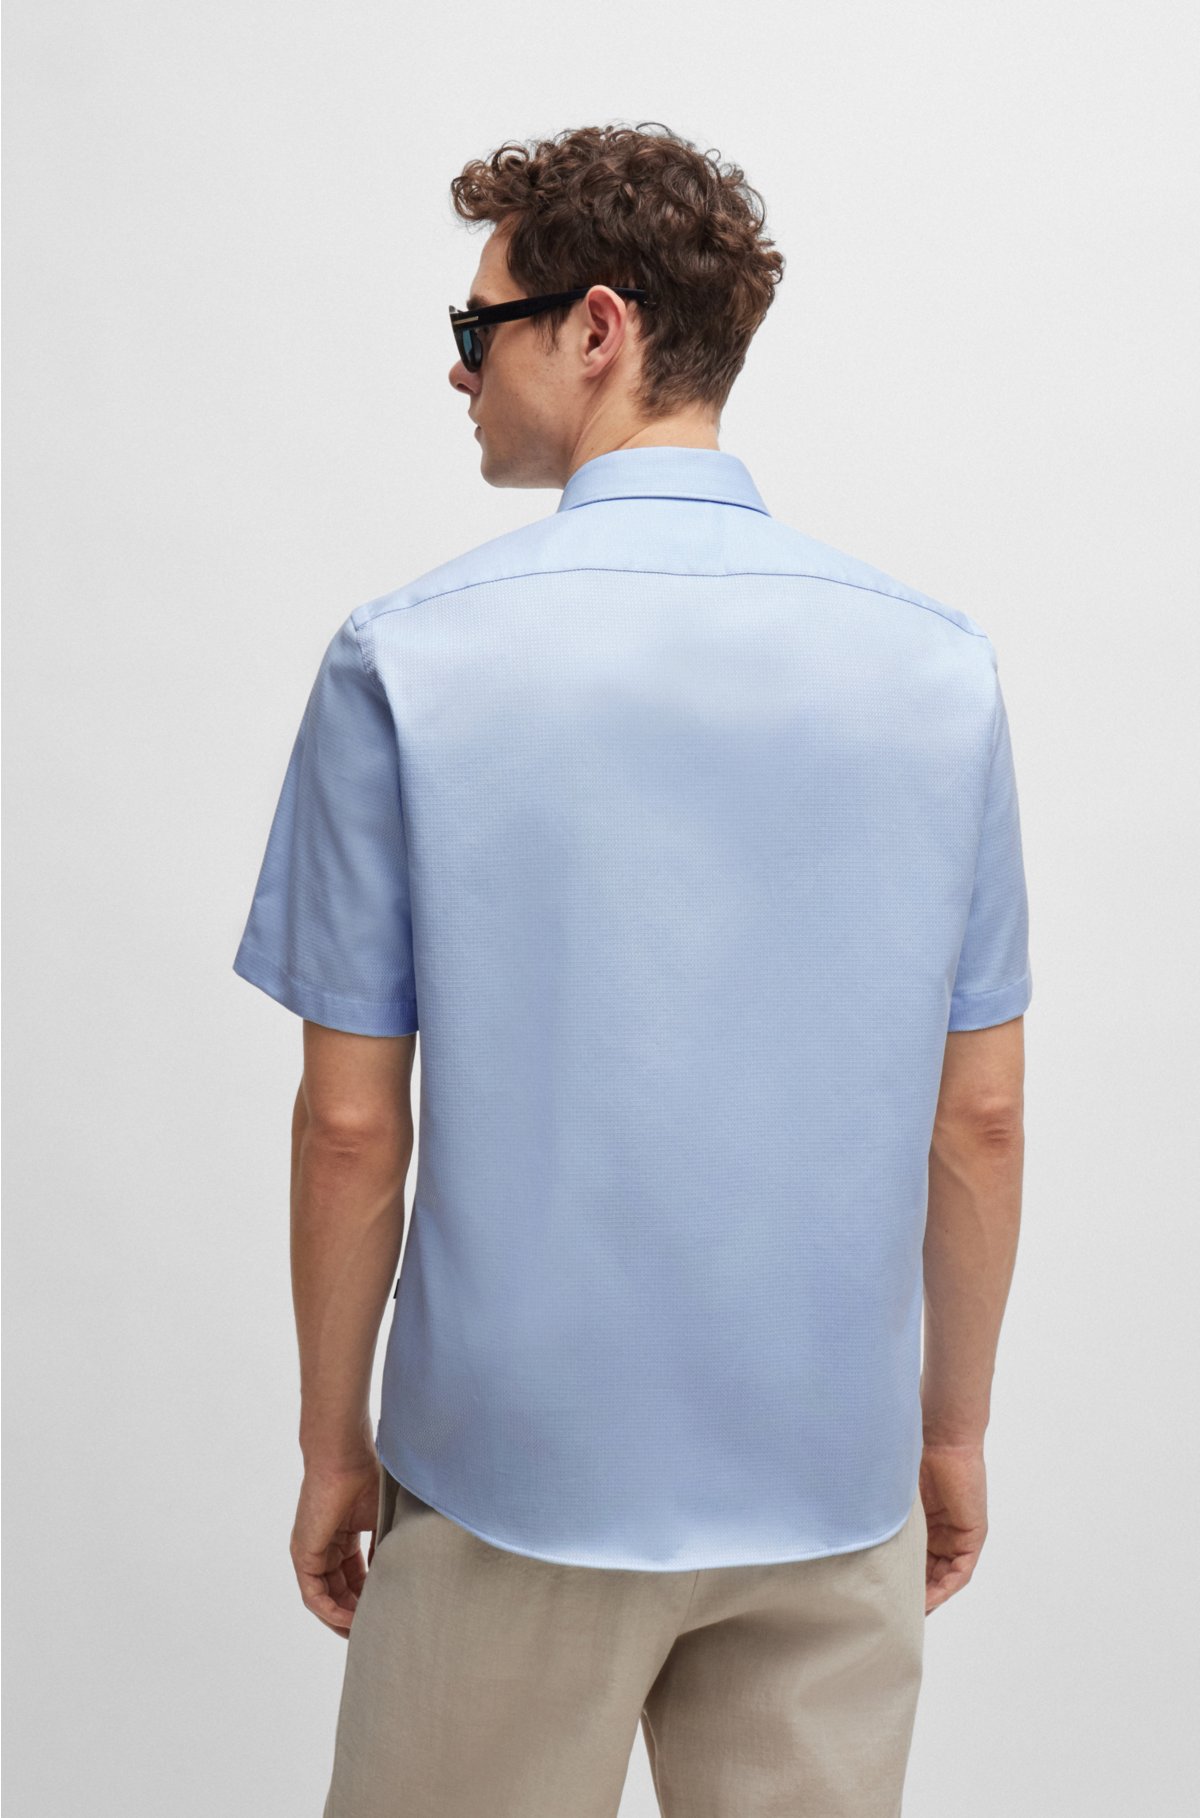 Regular-fit shirt in easy-iron structured stretch cotton, Light Blue